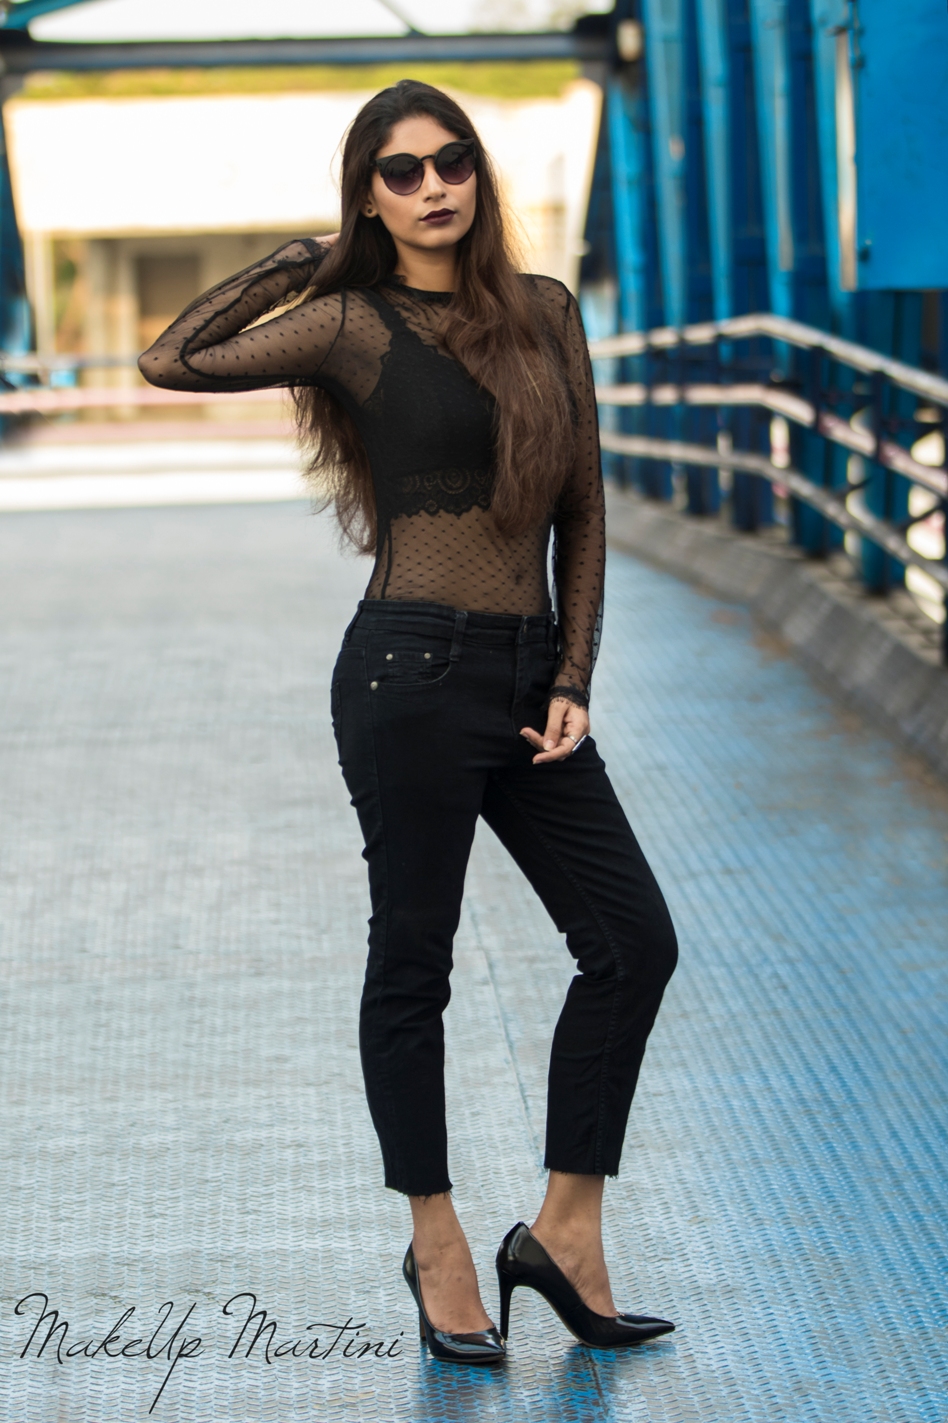 Black Mesh Top Outfit Online Hotsell ...